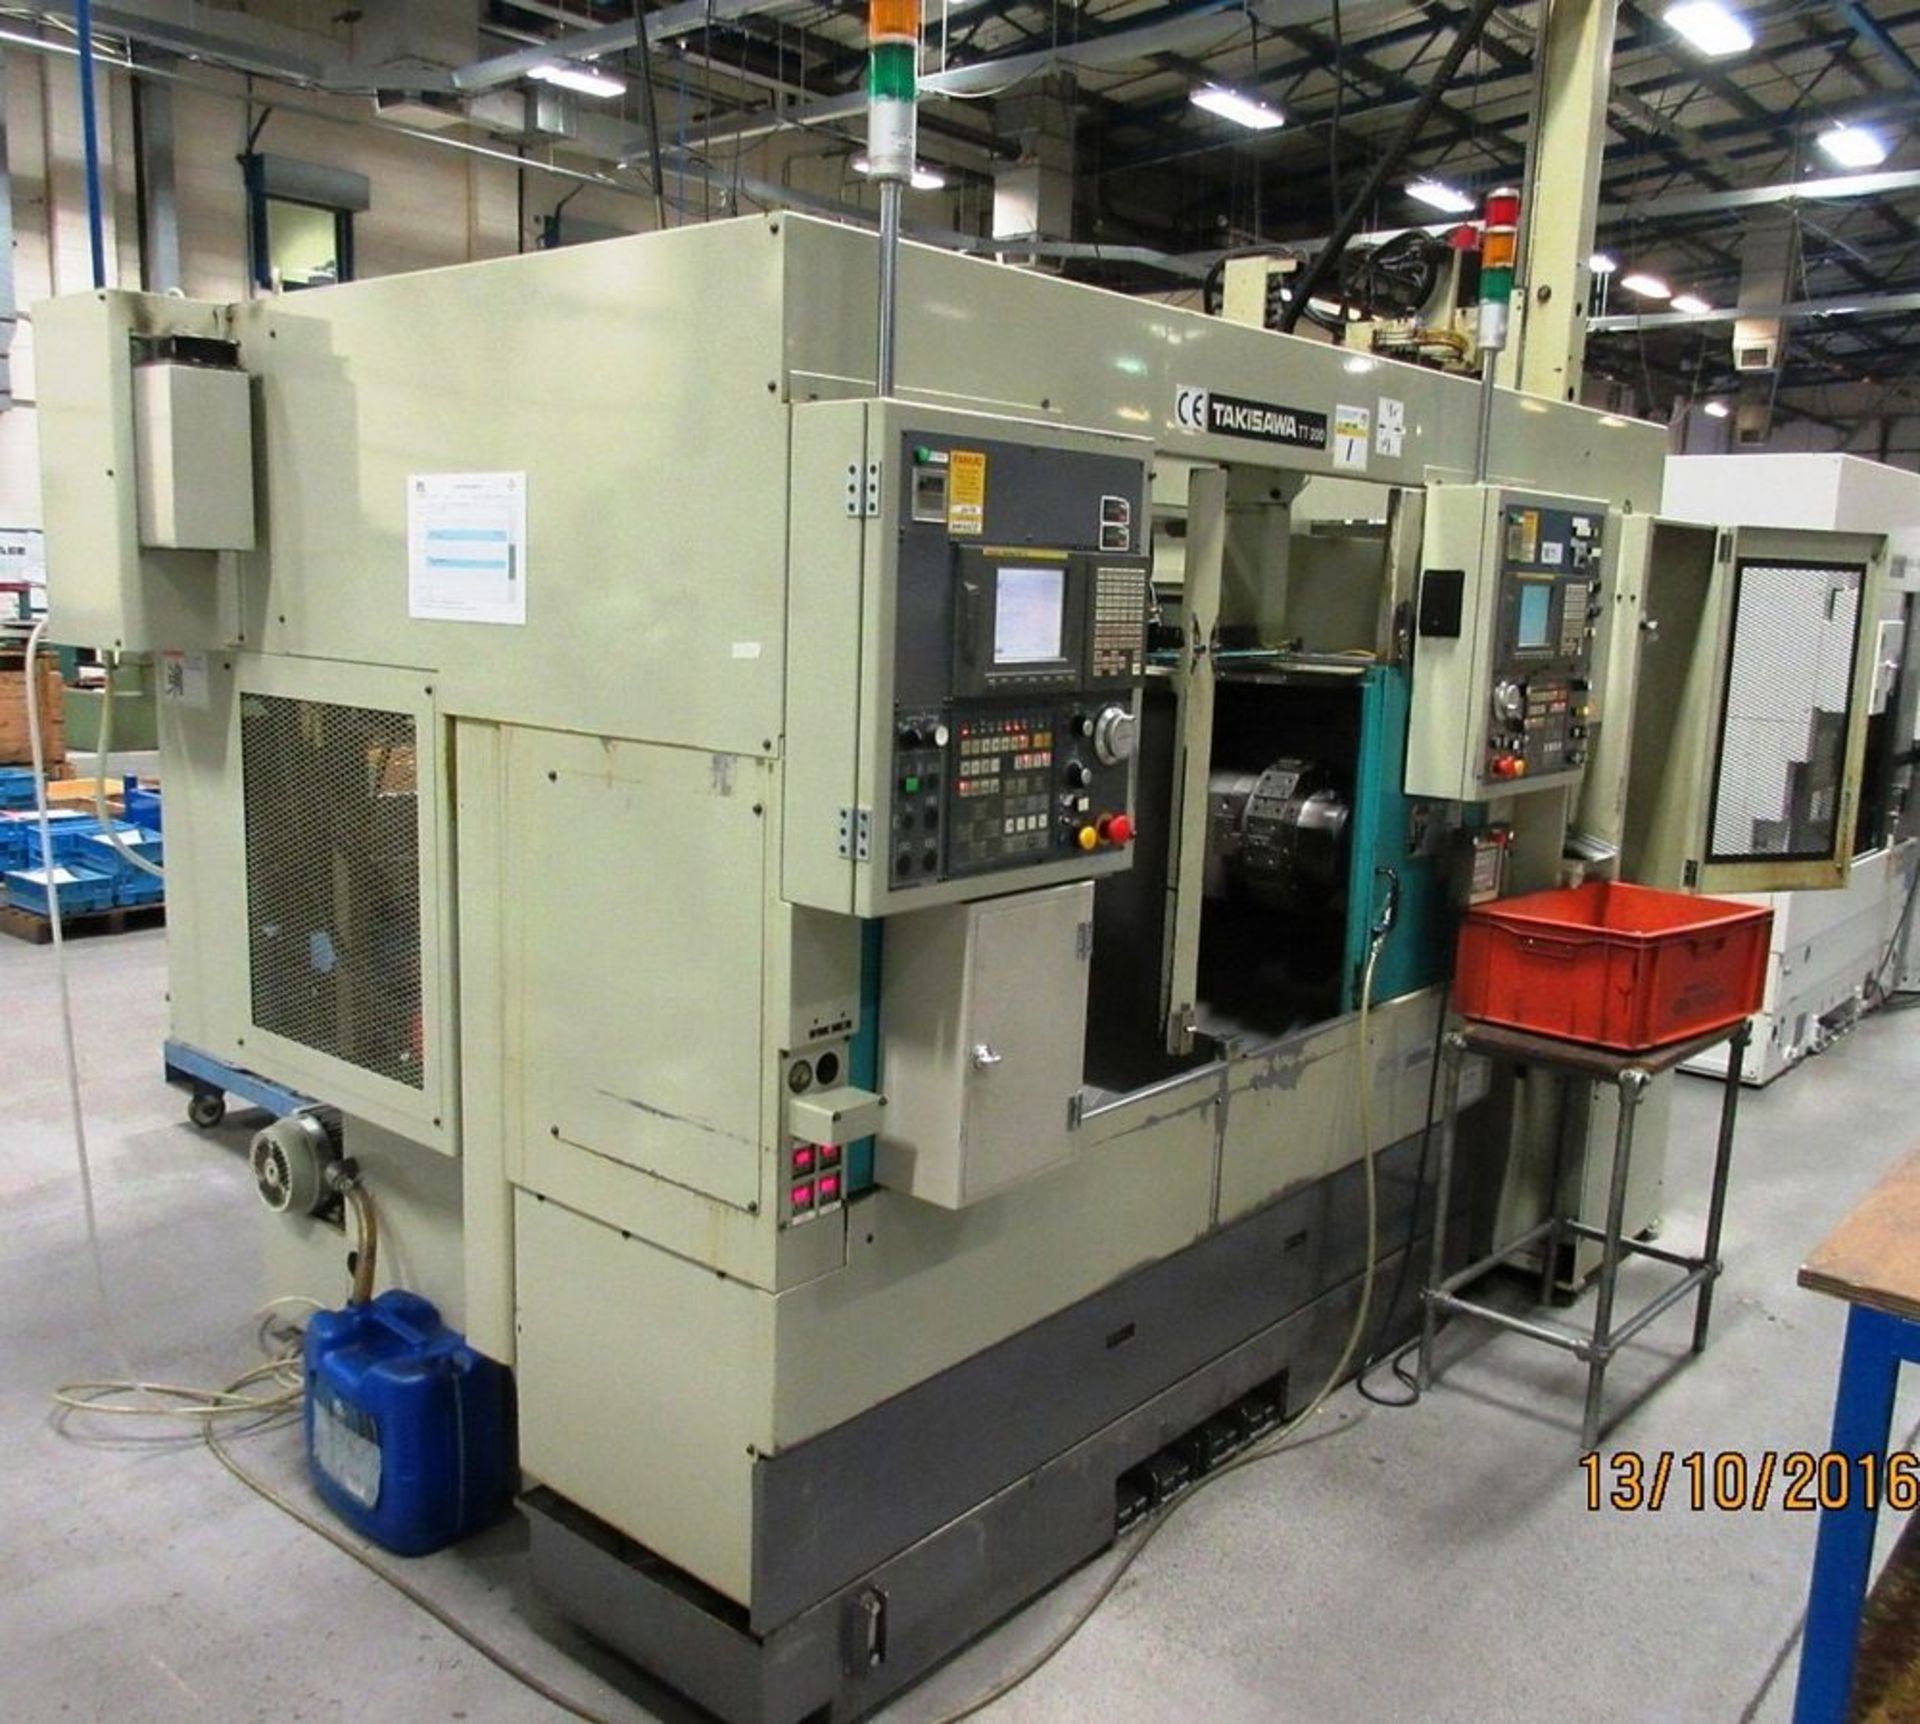 Takisawa TT-200-G CNC Twin Spindle Turning Center, S/N TNRS1127, New 2004 - Image 9 of 14